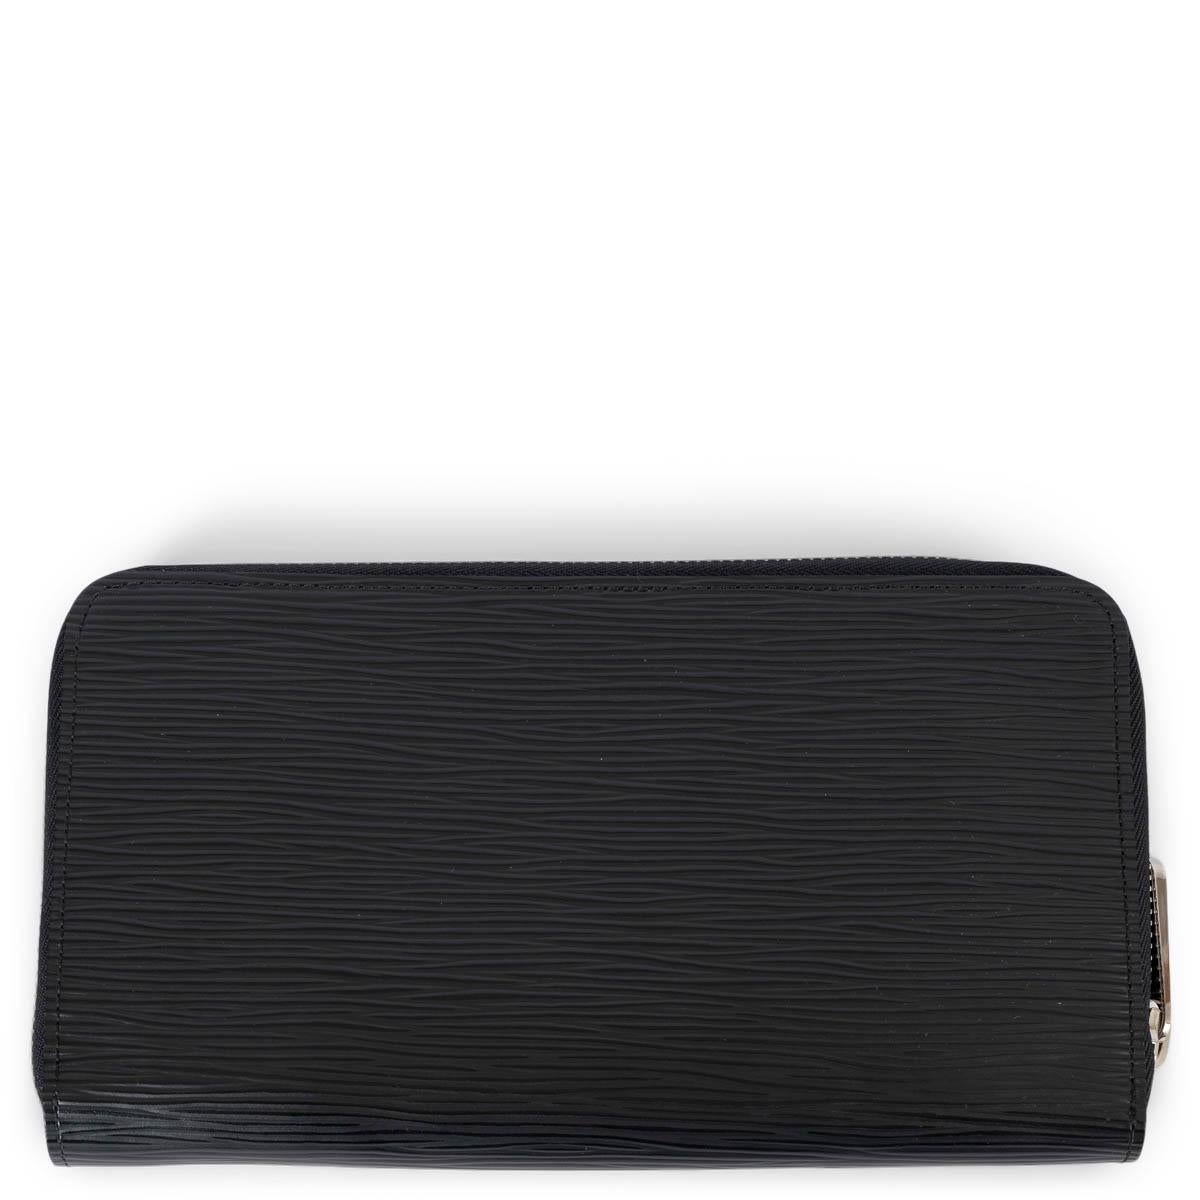 100% authentic Louis Vuitton Zippy wallet in black Epi leather with an all-round zip, which opens to reveal multiple card slots, pockets and compartments. The design features silver-tone hardware, 2 large gusseted compartments, bill pocket, large